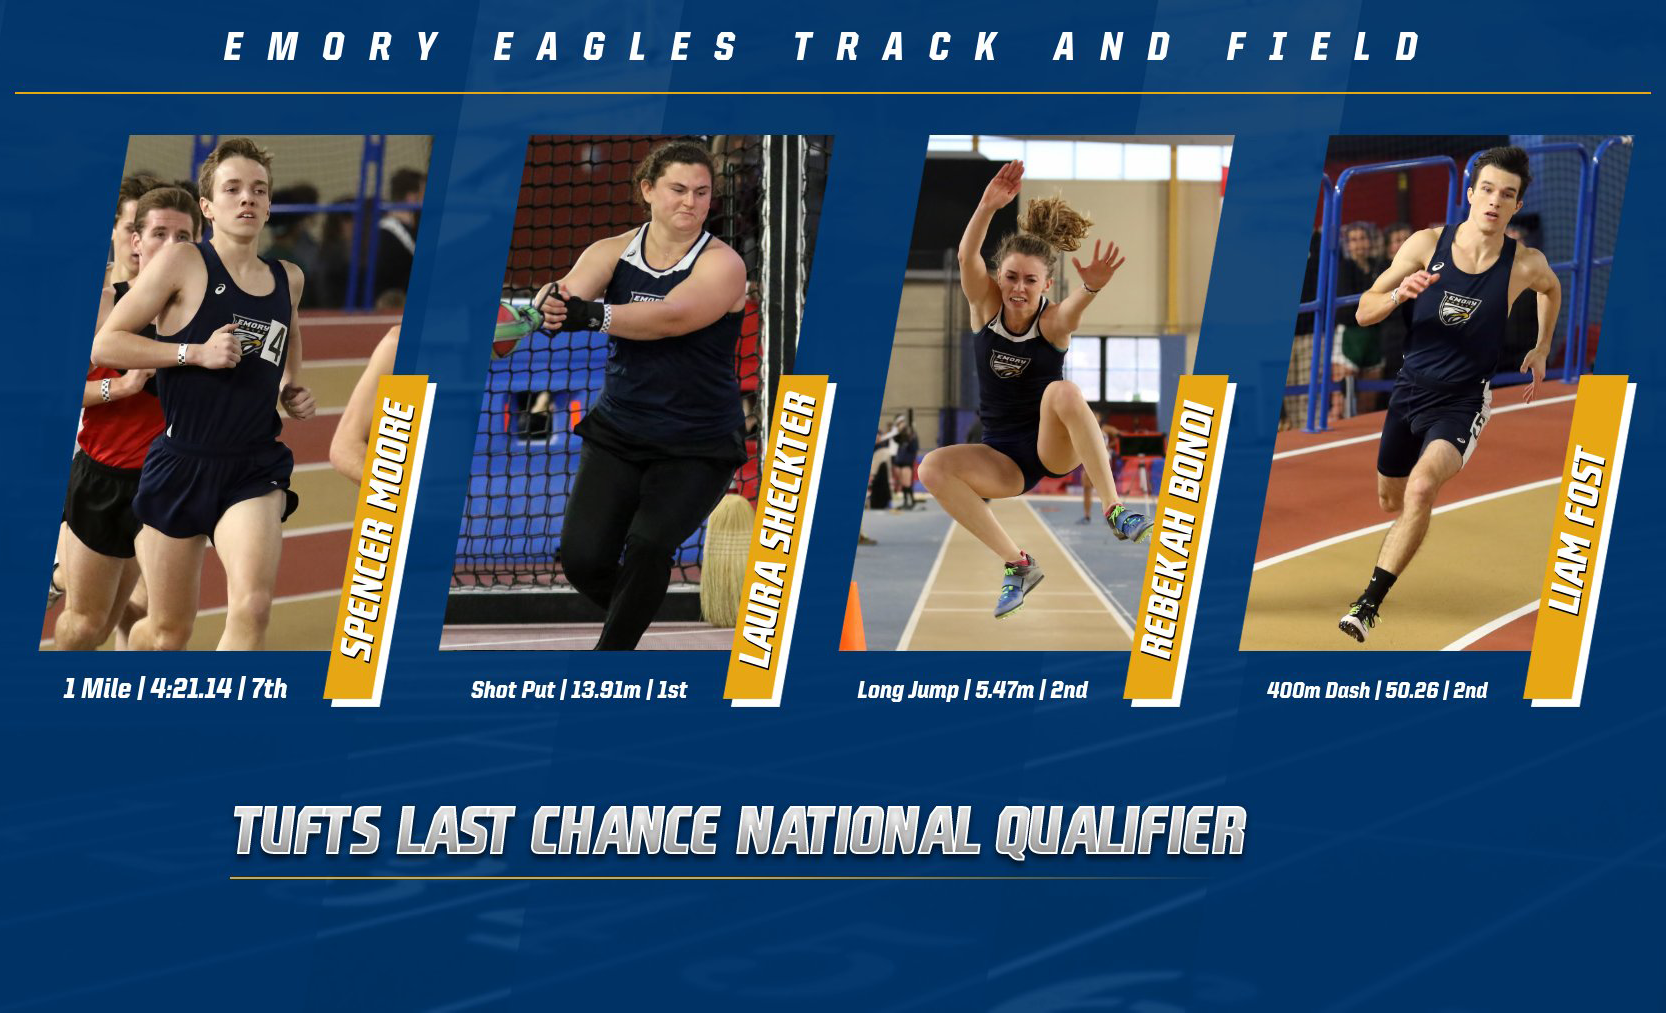 Four Emory Track & Field Athletes Compete at Tufts Last Chance National Qualifier